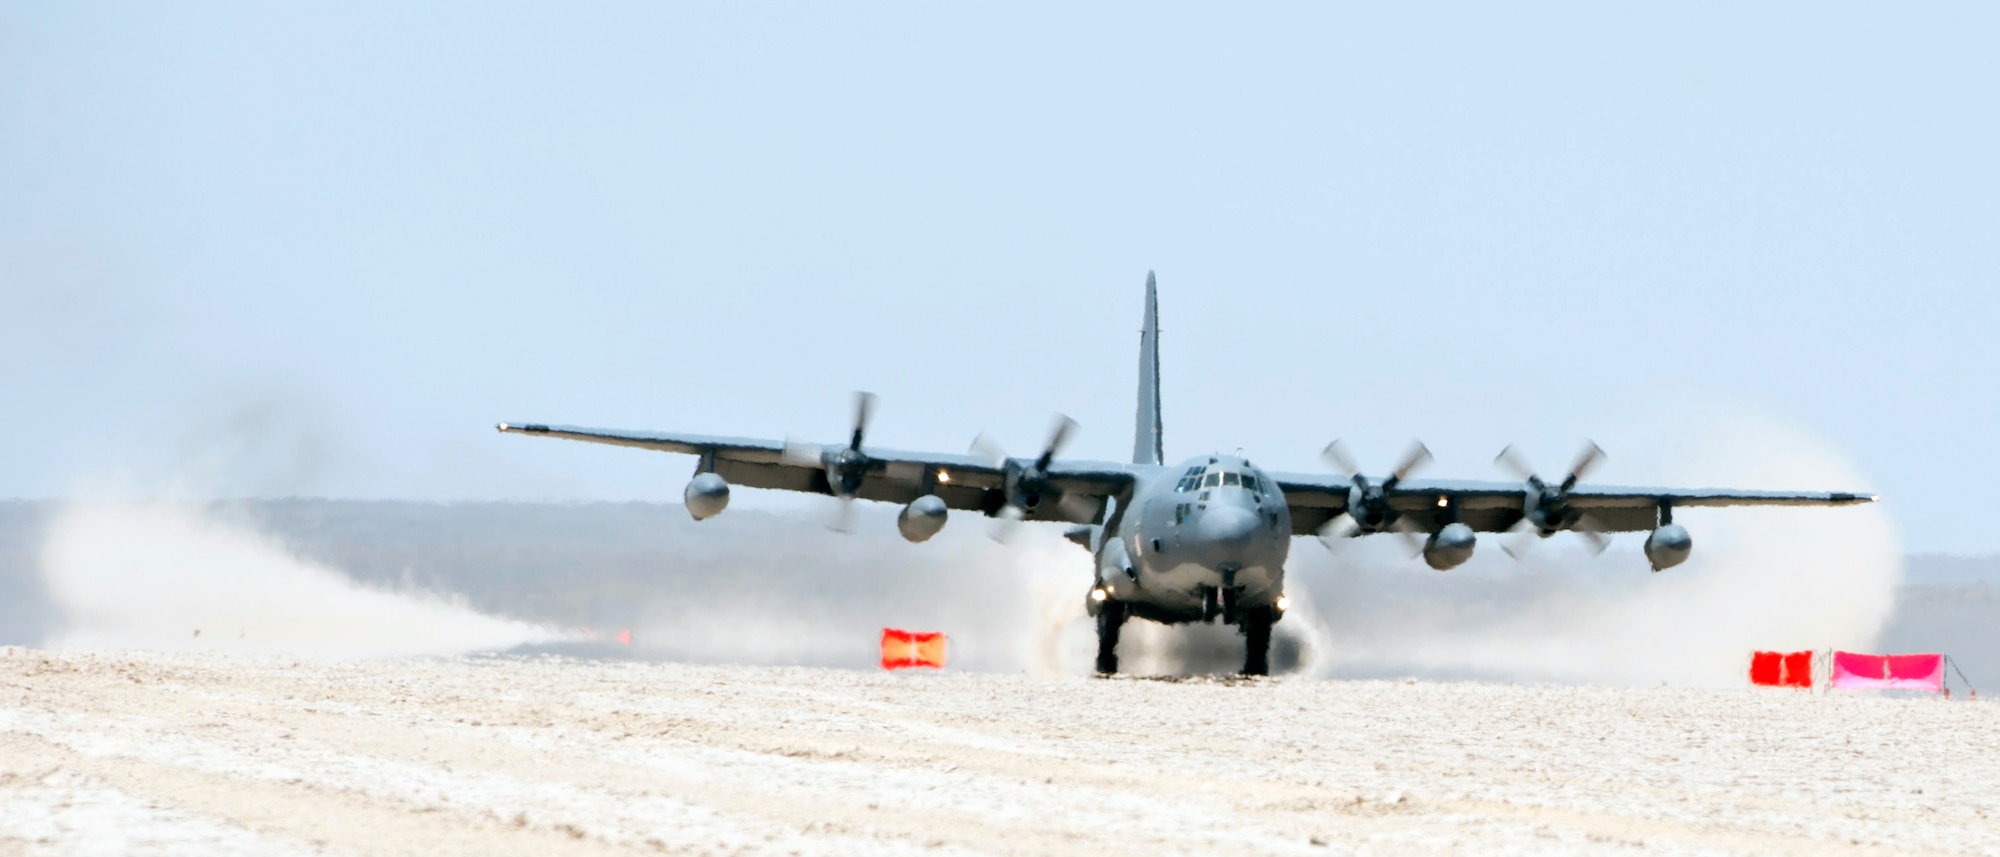 A HC-130 Combat King lands during a forward arming and refuel point exercise Mar 12, 2015, at Grand Bara, Djibouti. The Combat King provided several smaller airframes a refueling point to help extend their flying distance in preparation to any crisis response mission. (U.S. Air Force photo/Staff Sgt. Kevin Iinuma)
